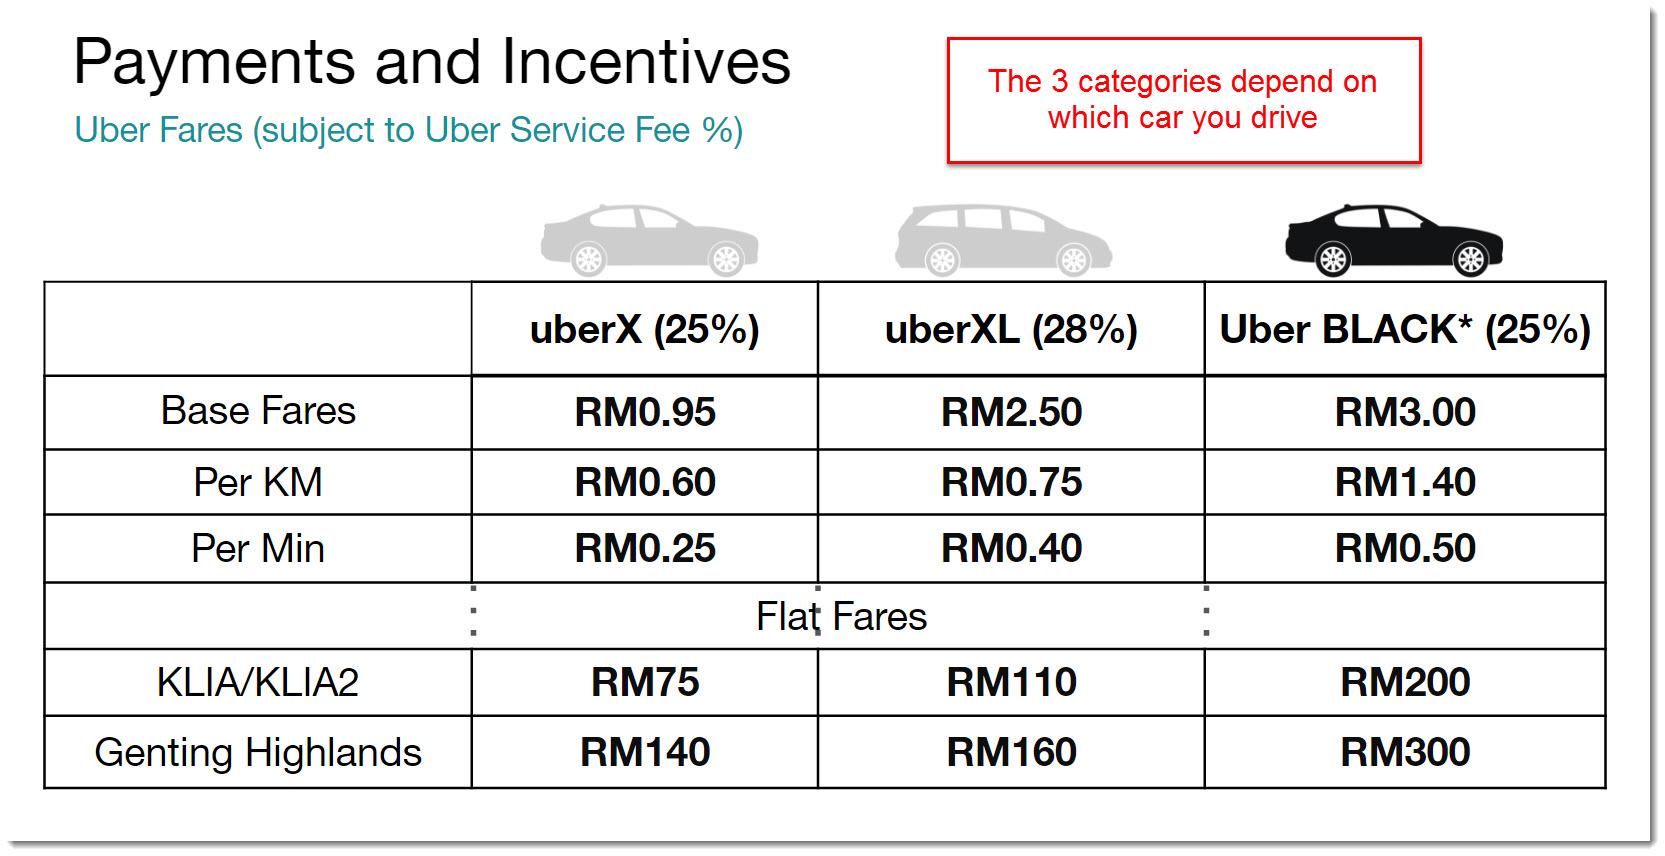 uber calculations for all categories in Malaysia